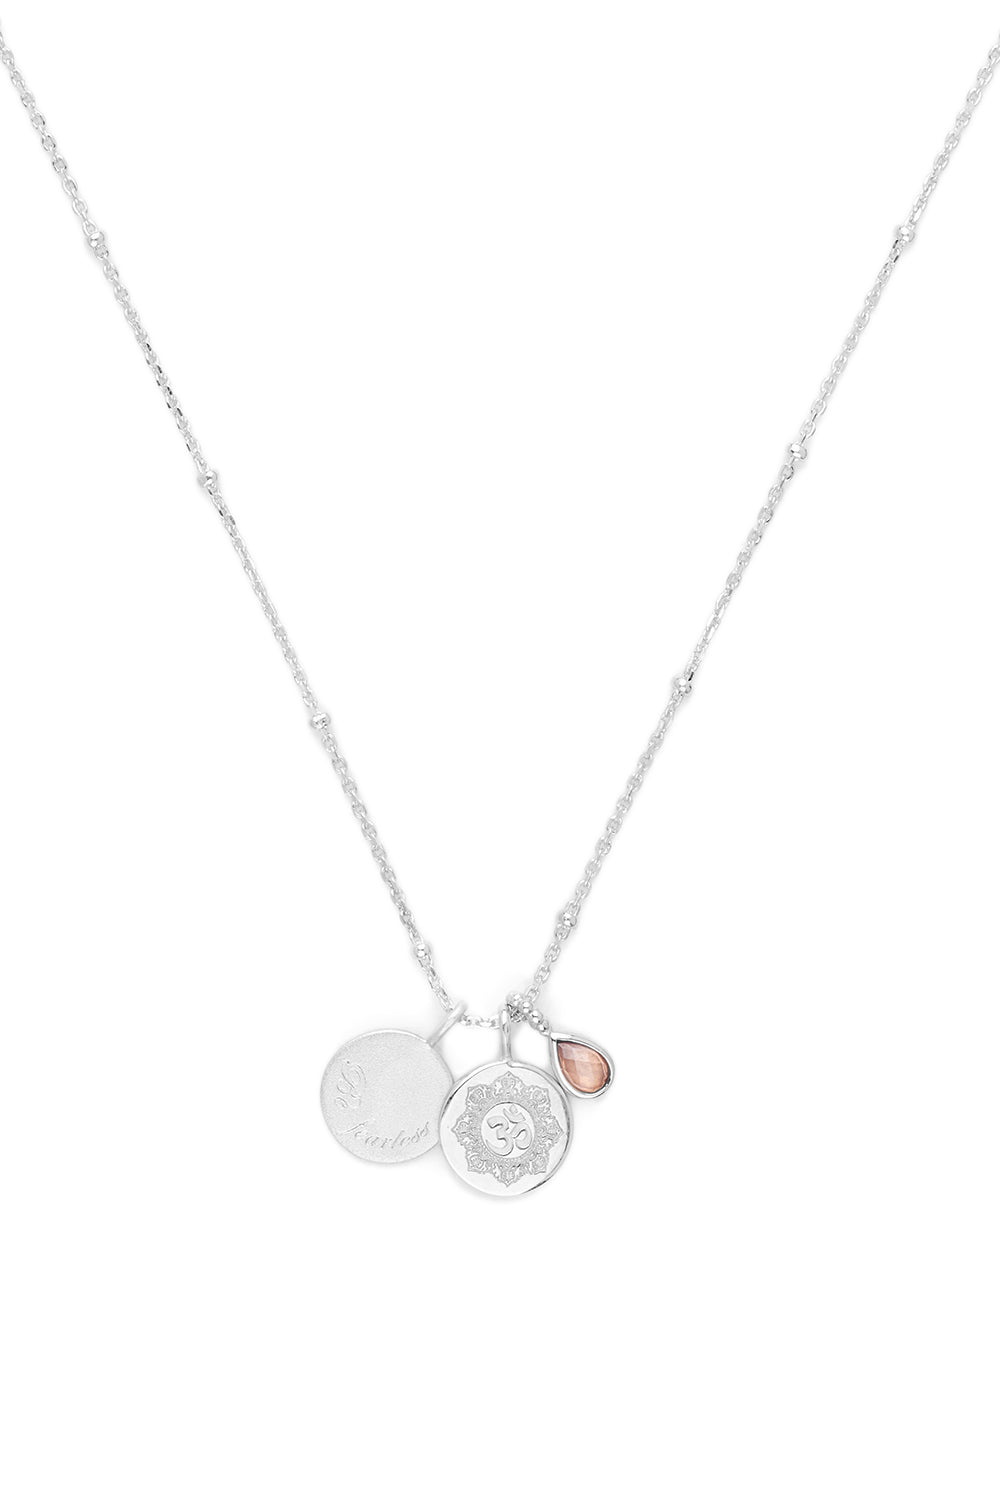 BY CHARLOTTE BEYOND SUN NECKLACE SILVER PLATED